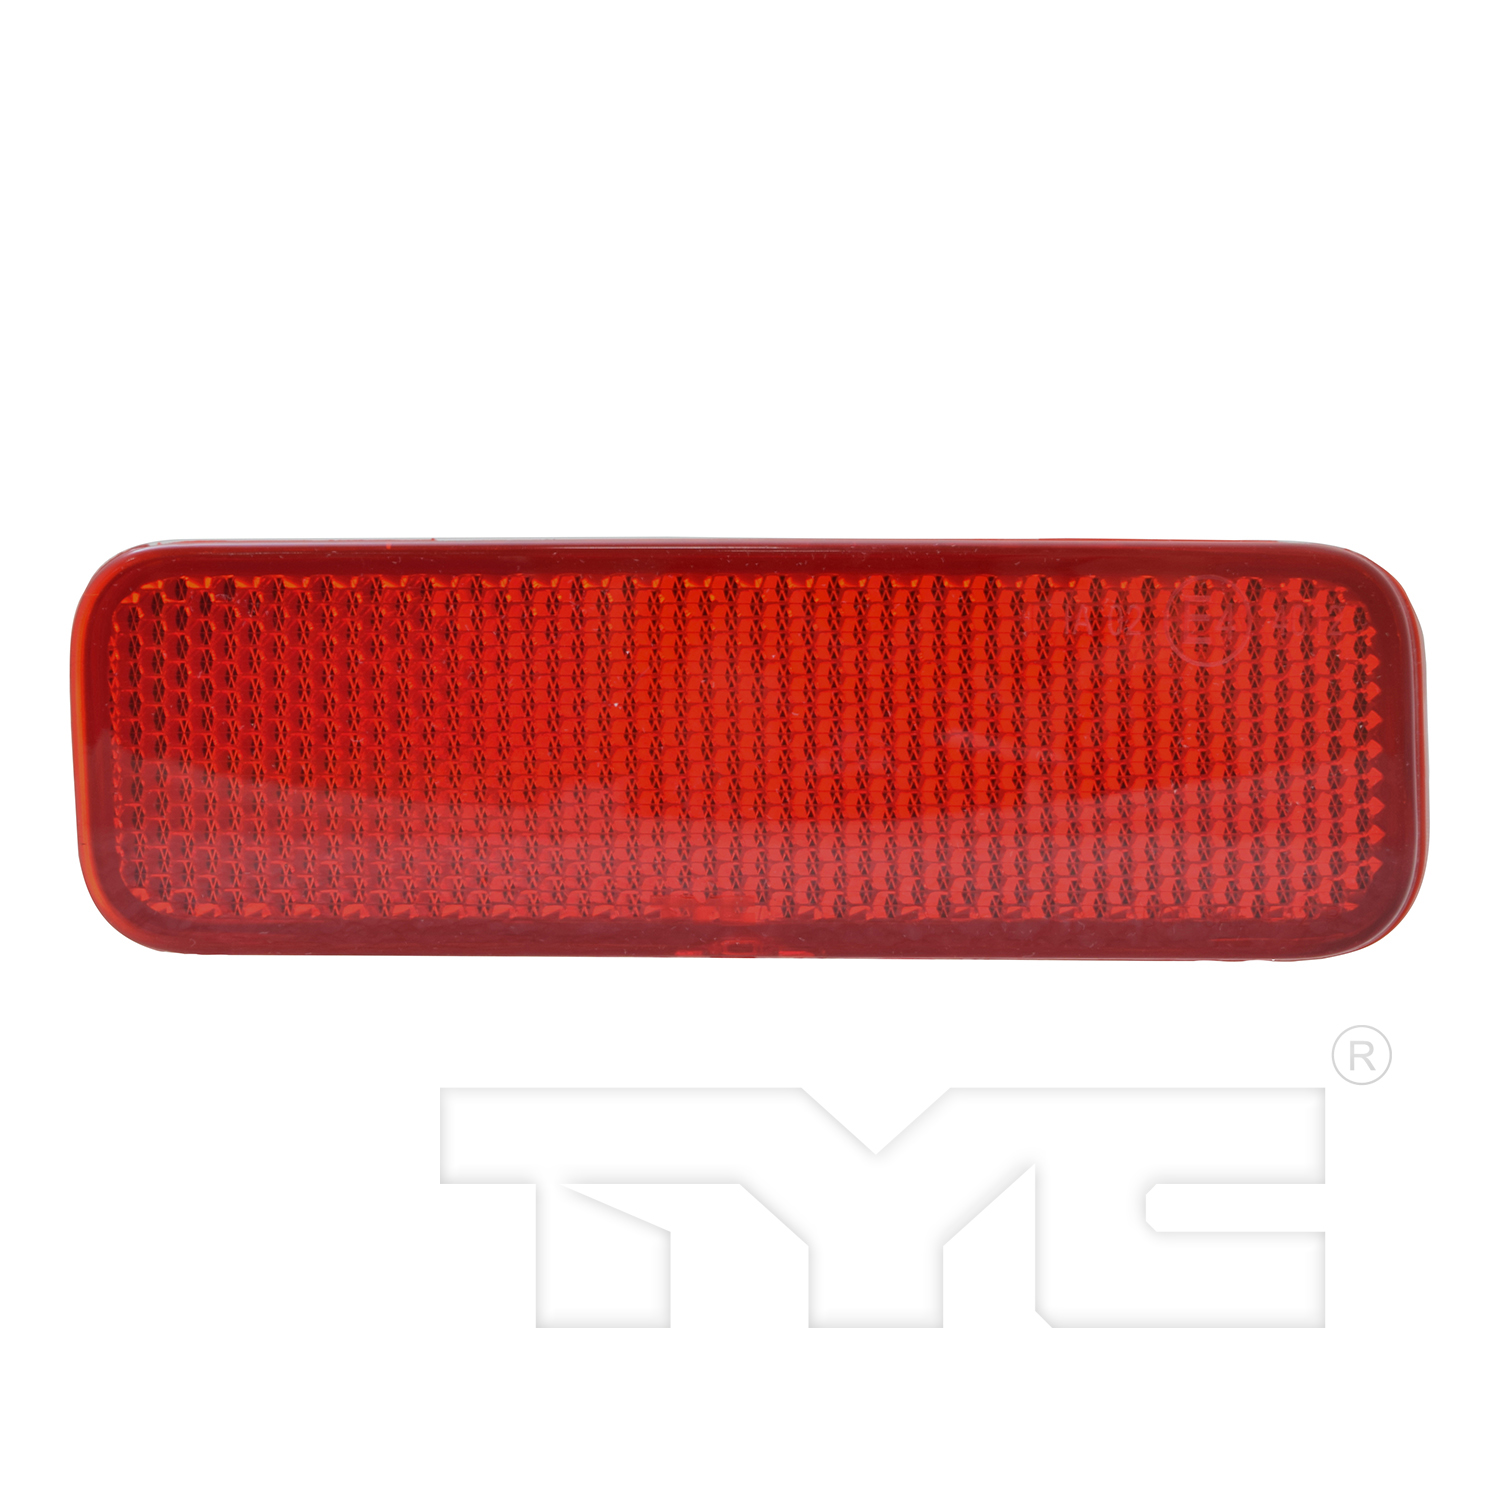 Aftermarket LAMPS for FORD - TRANSIT CONNECT, TRANSIT CONNECT,14-18,RT Rear bumper reflector